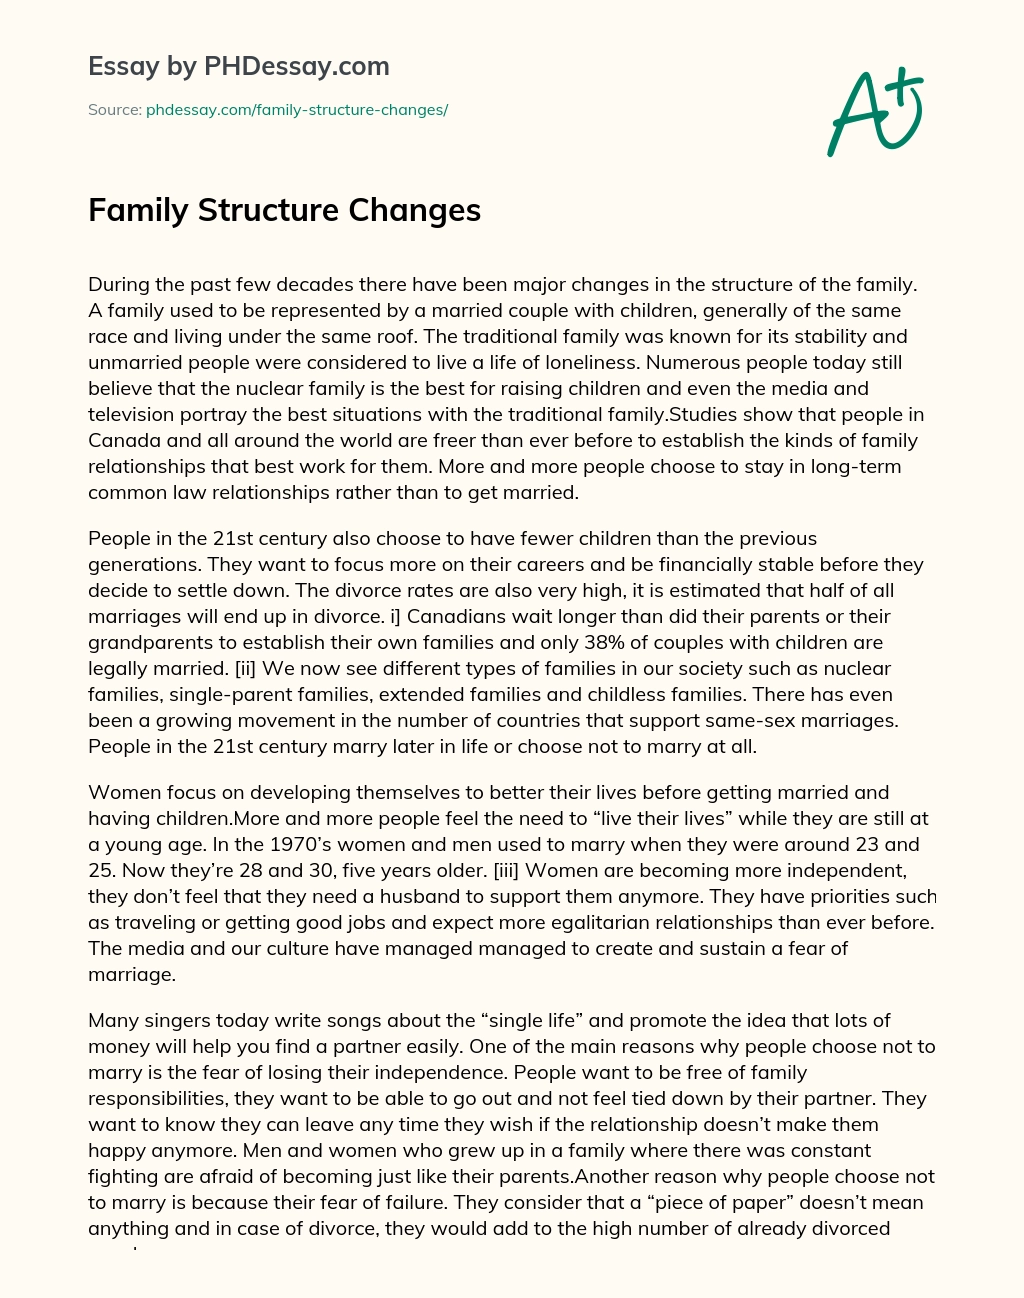 Family Structure Changes essay